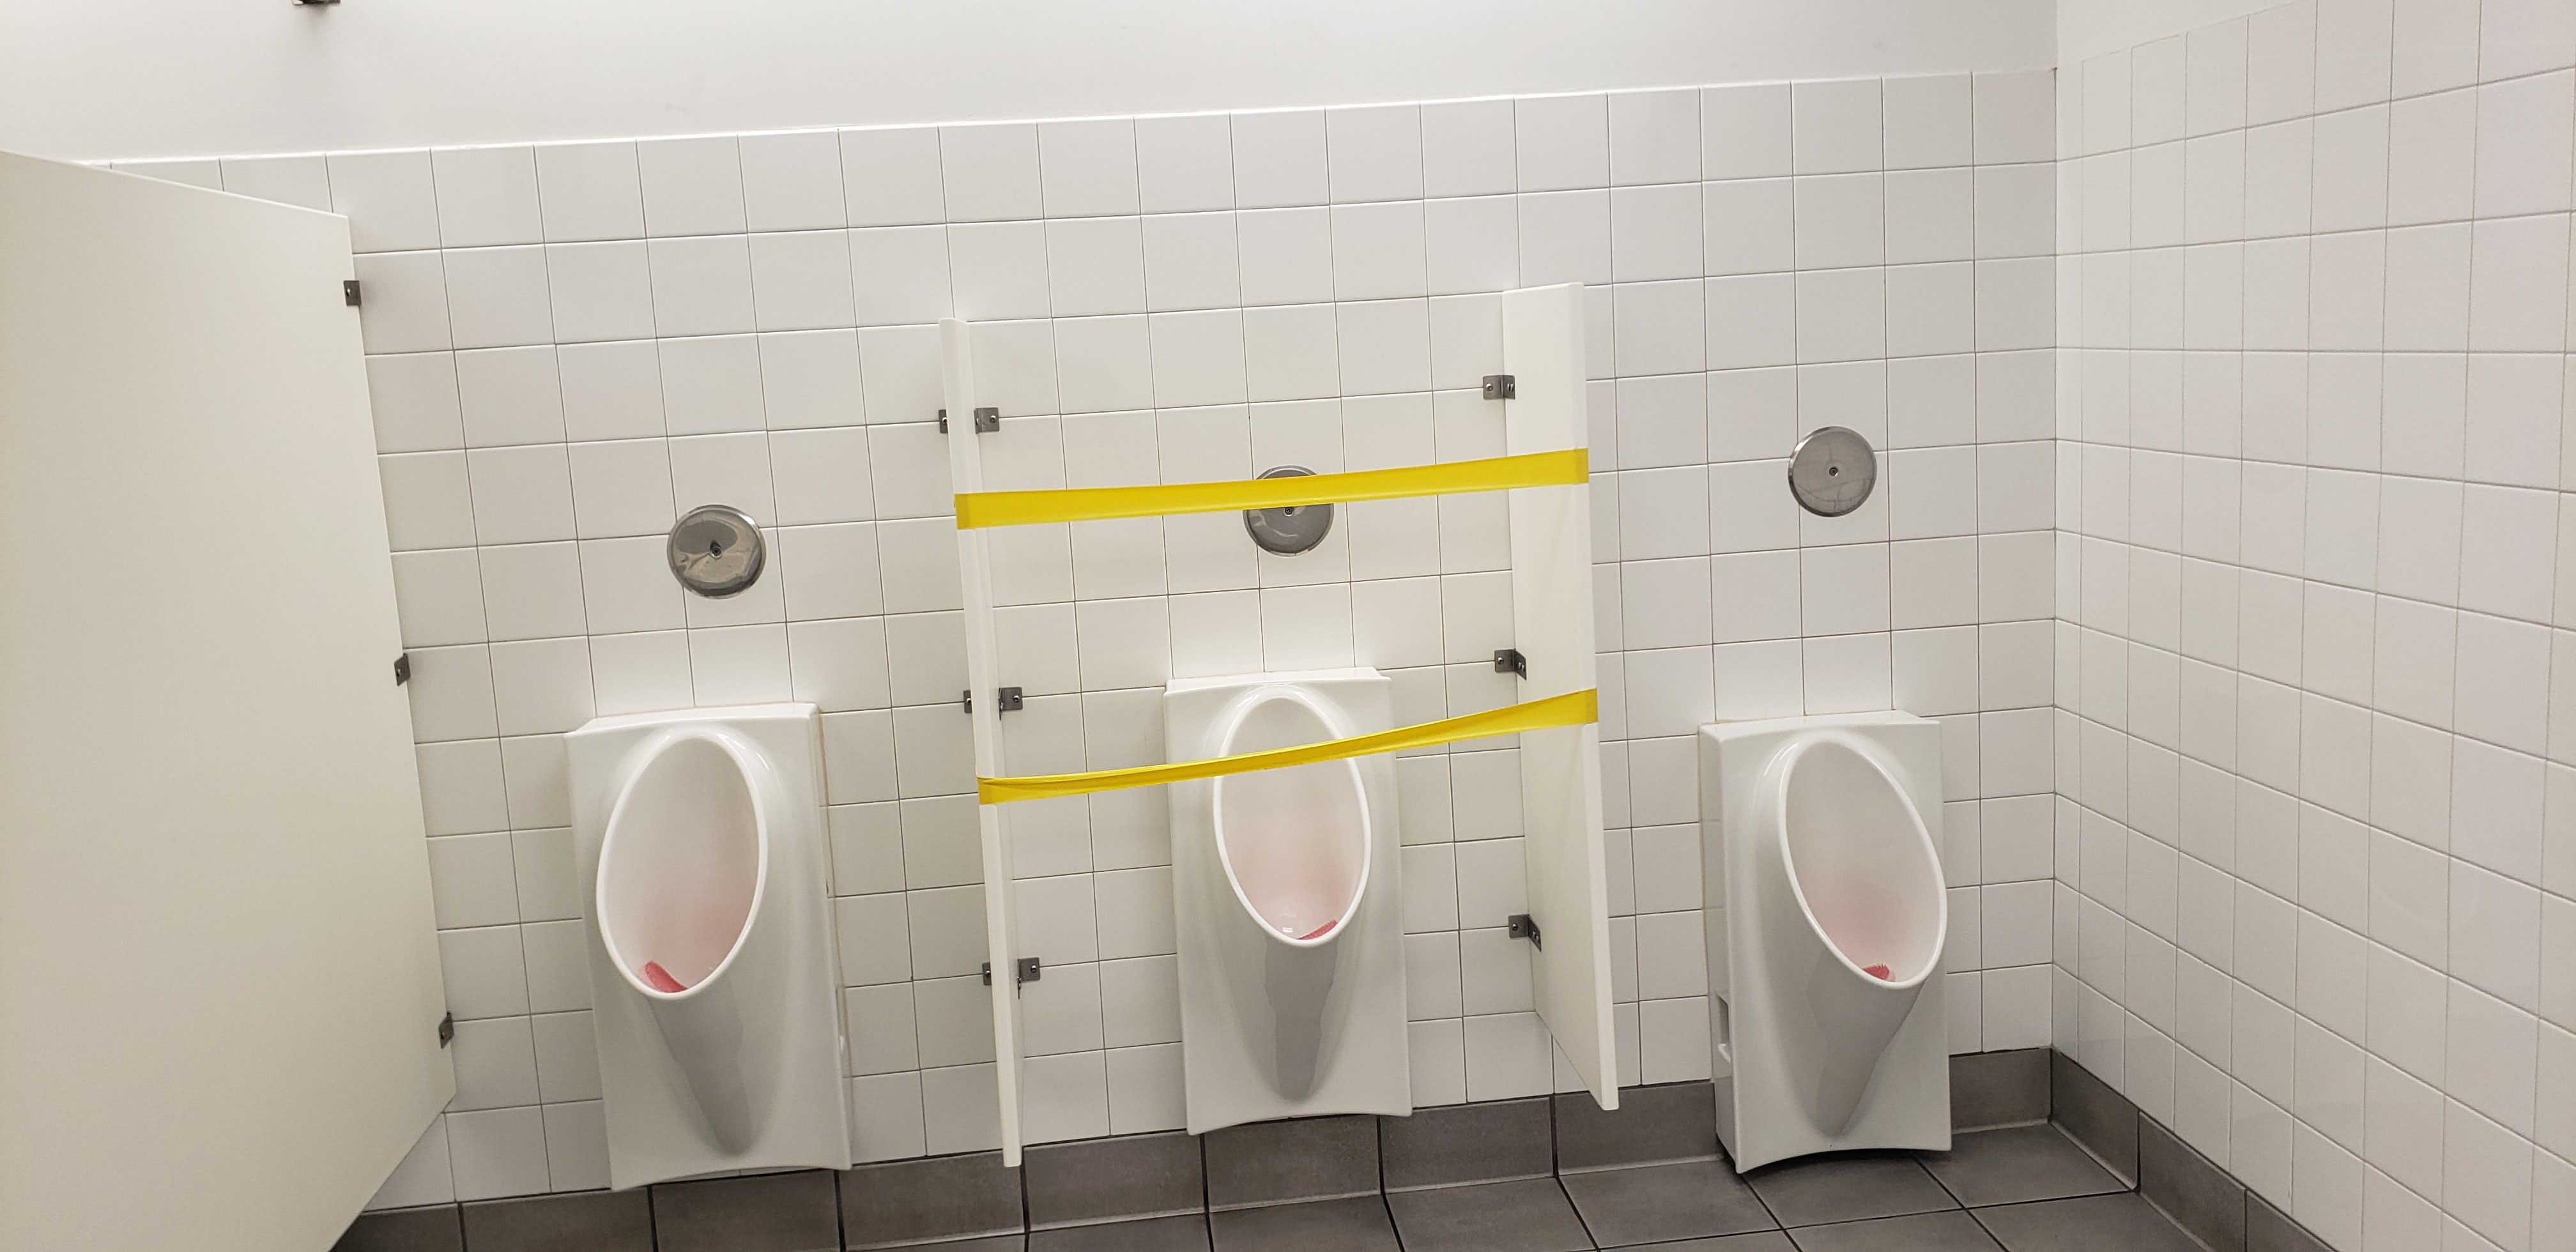 Completely unnecessary IKEA. Men have been social distancing in bathrooms since the urinal was invented.